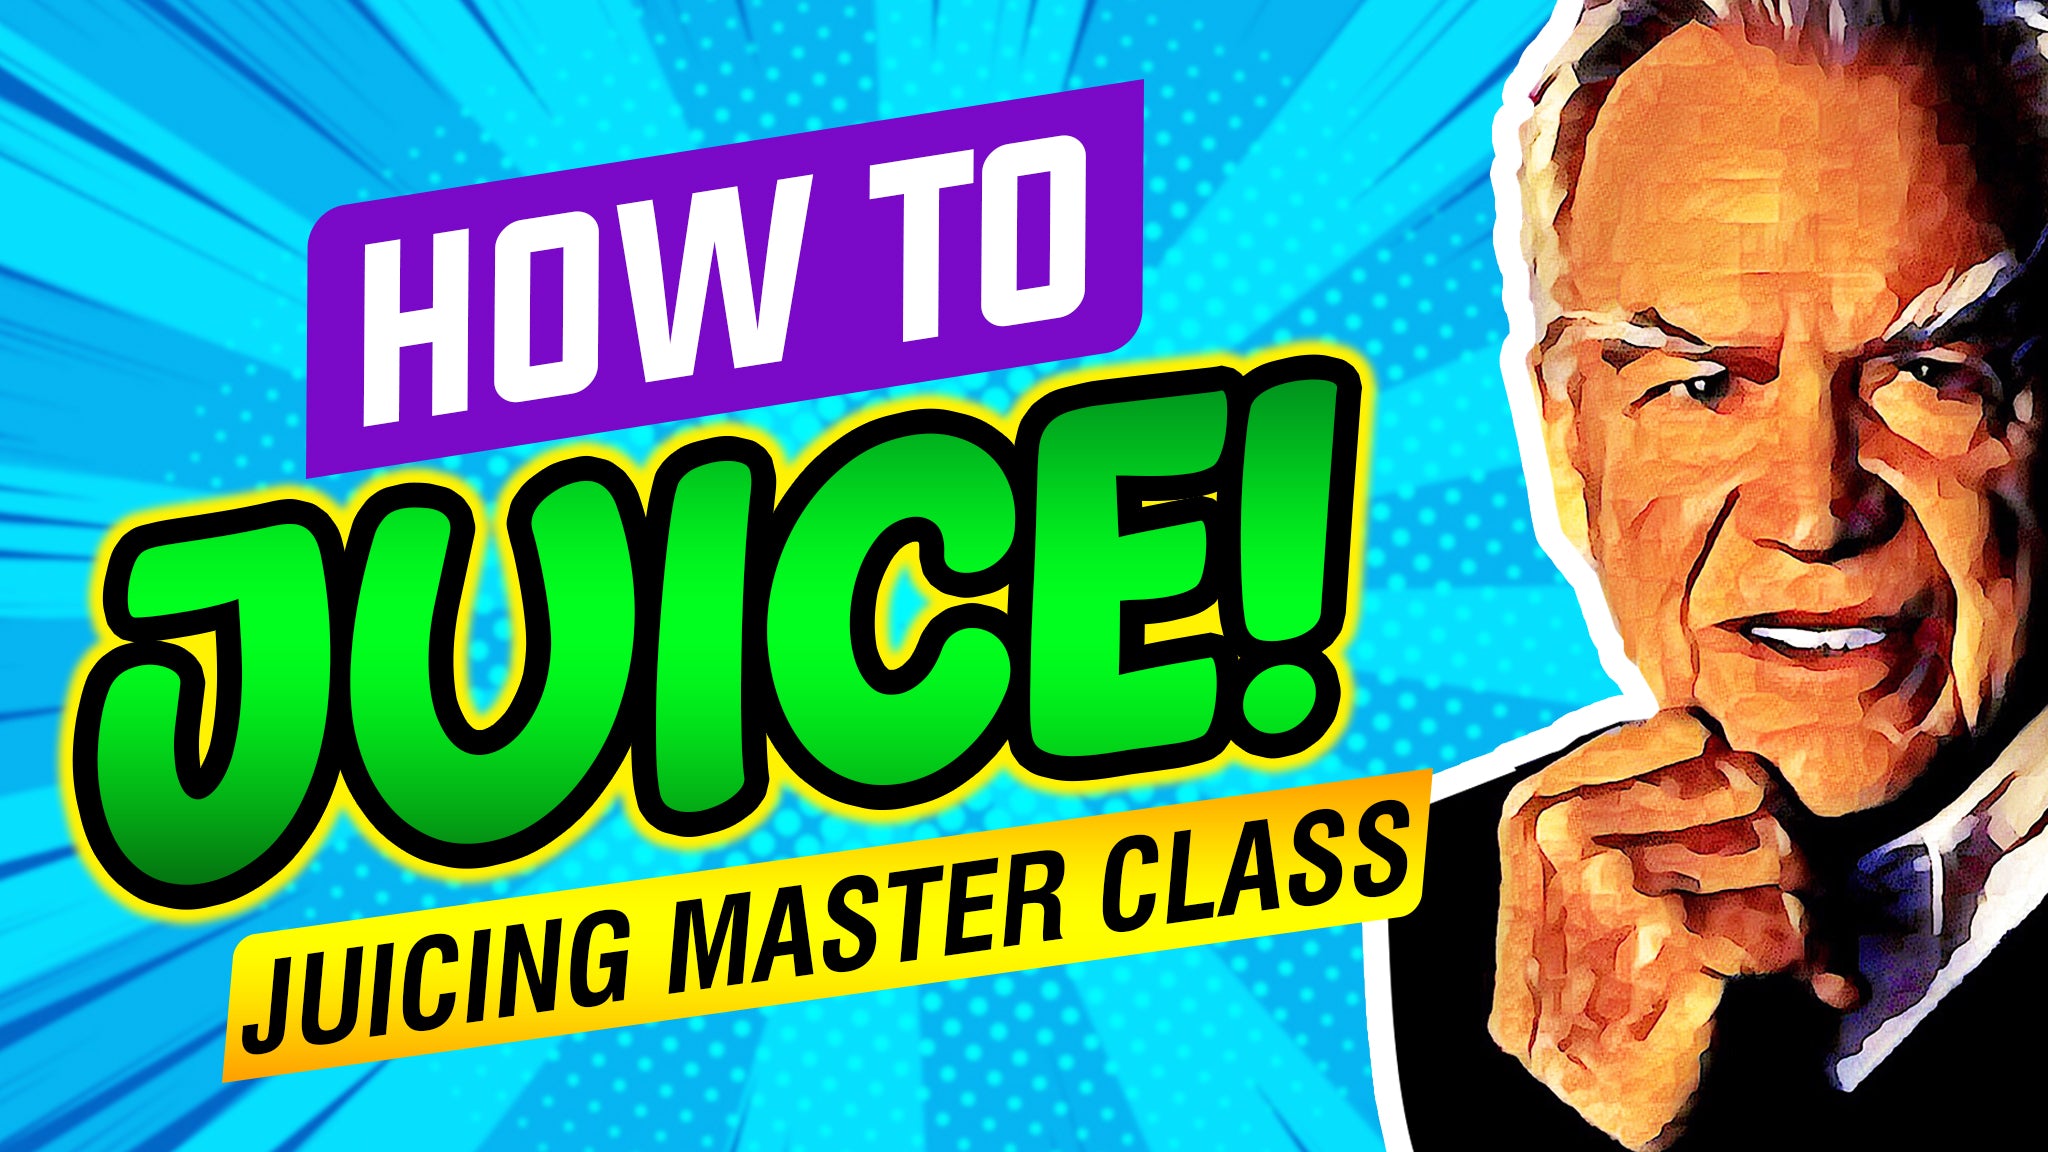 The Juicing Master Class = 780 PLUS Pages - Learn from the Father of Juicing! Digital Program with Graduate Certificate